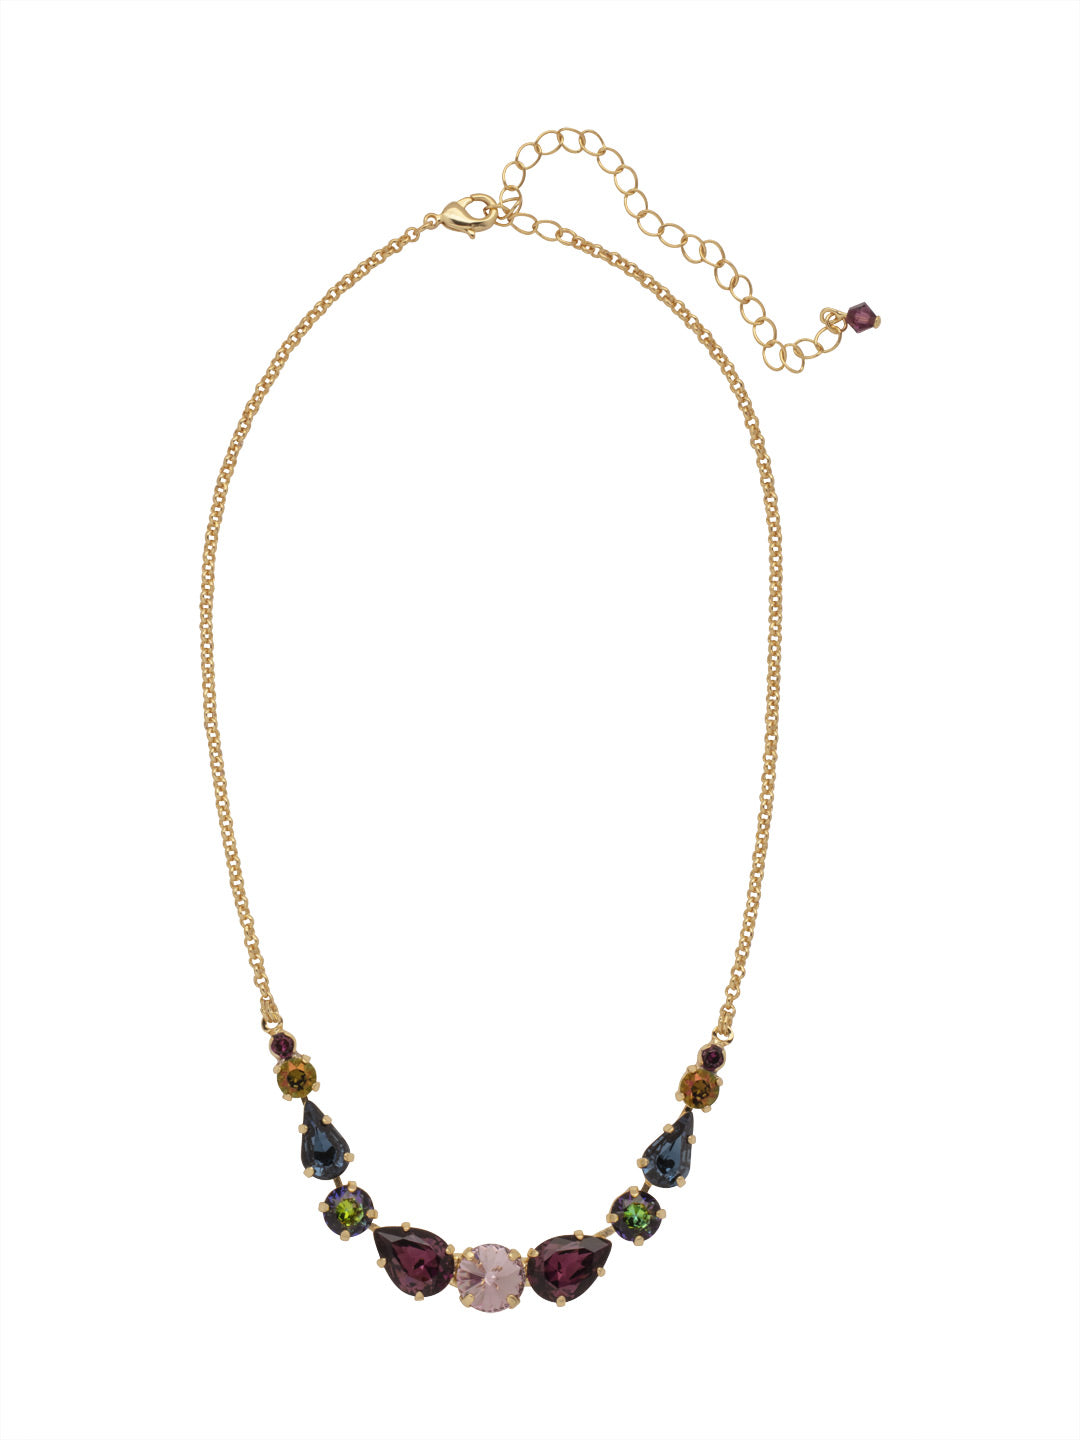 Polished Pear Statement Necklace - NDN74BGROP